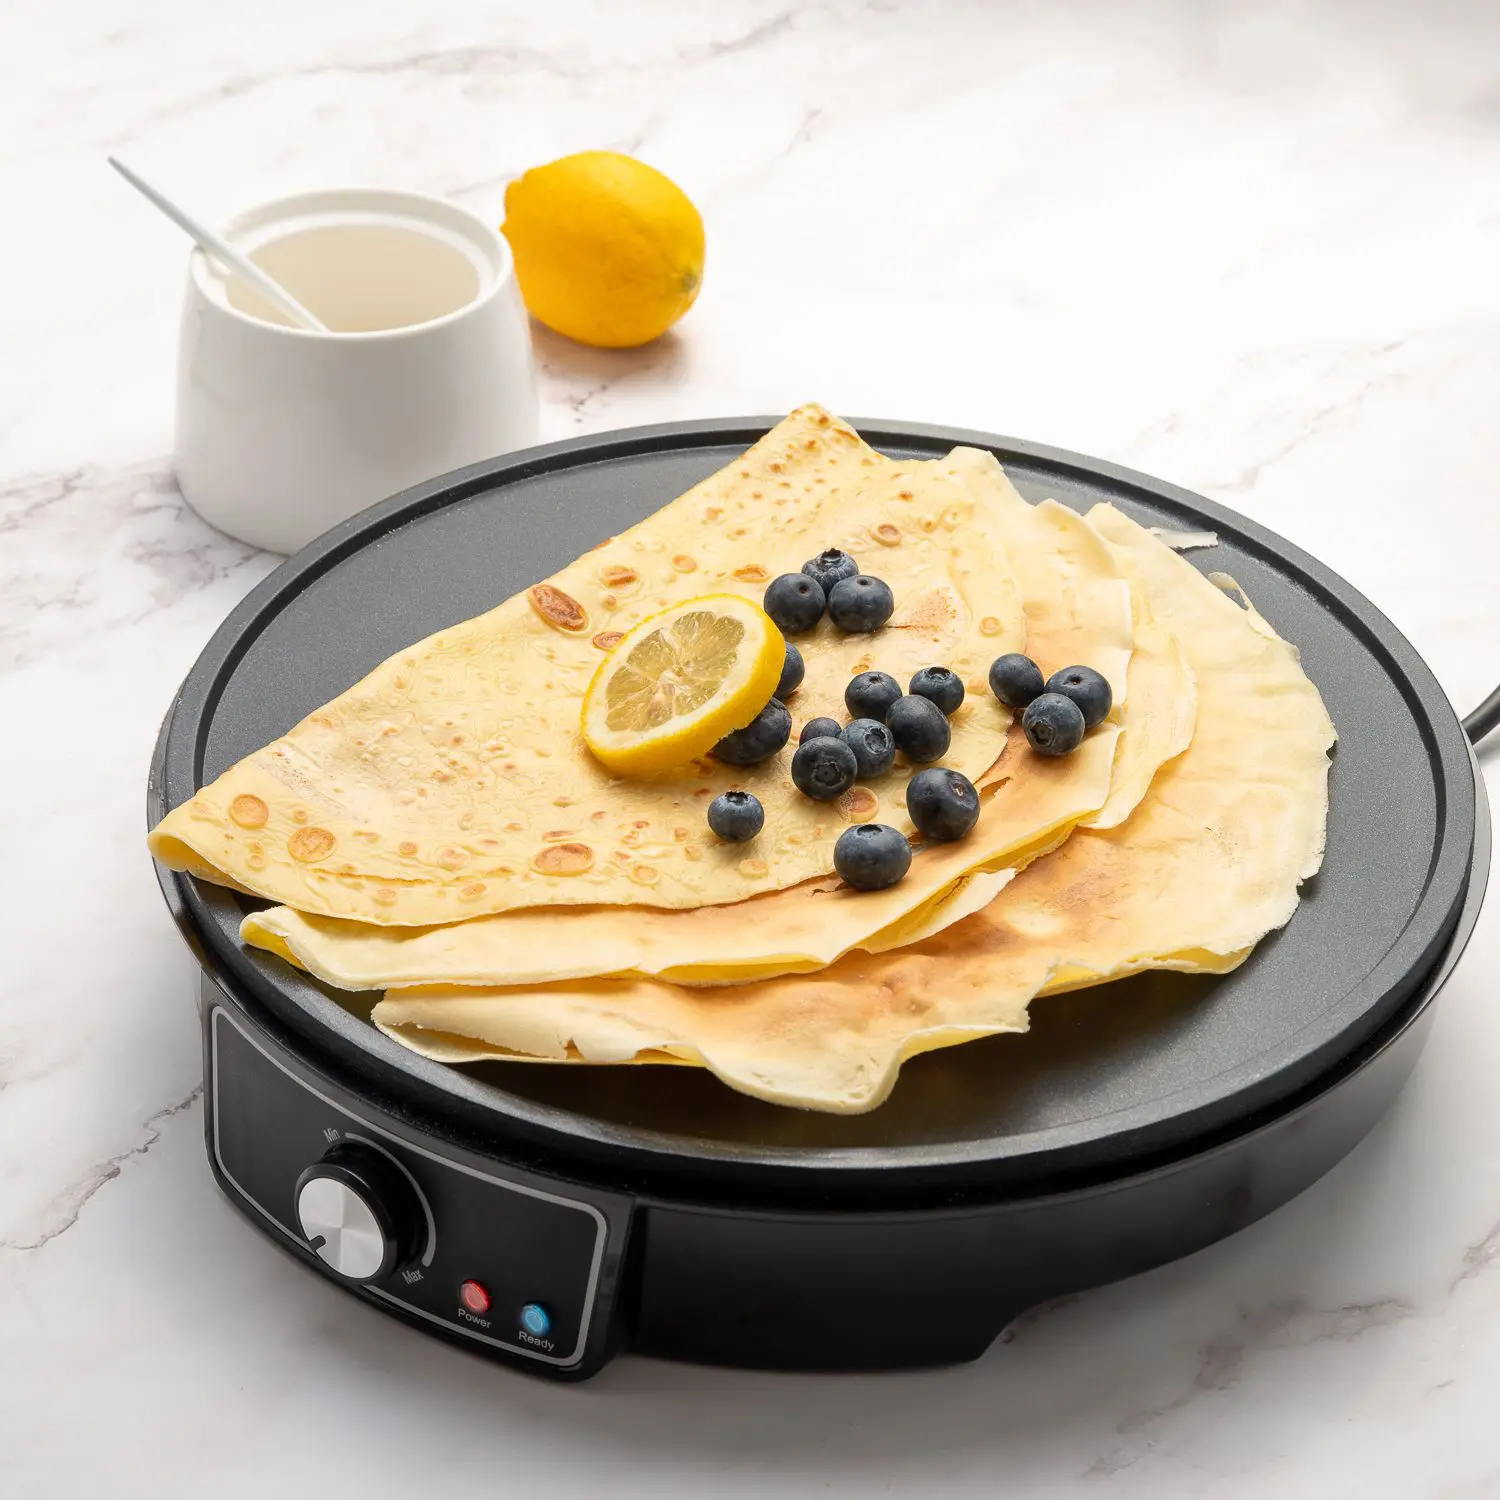 Home Treats KA918 1000W 12" Non Stick Electric Pancake Crepe Maker with Wooden Utensils, 